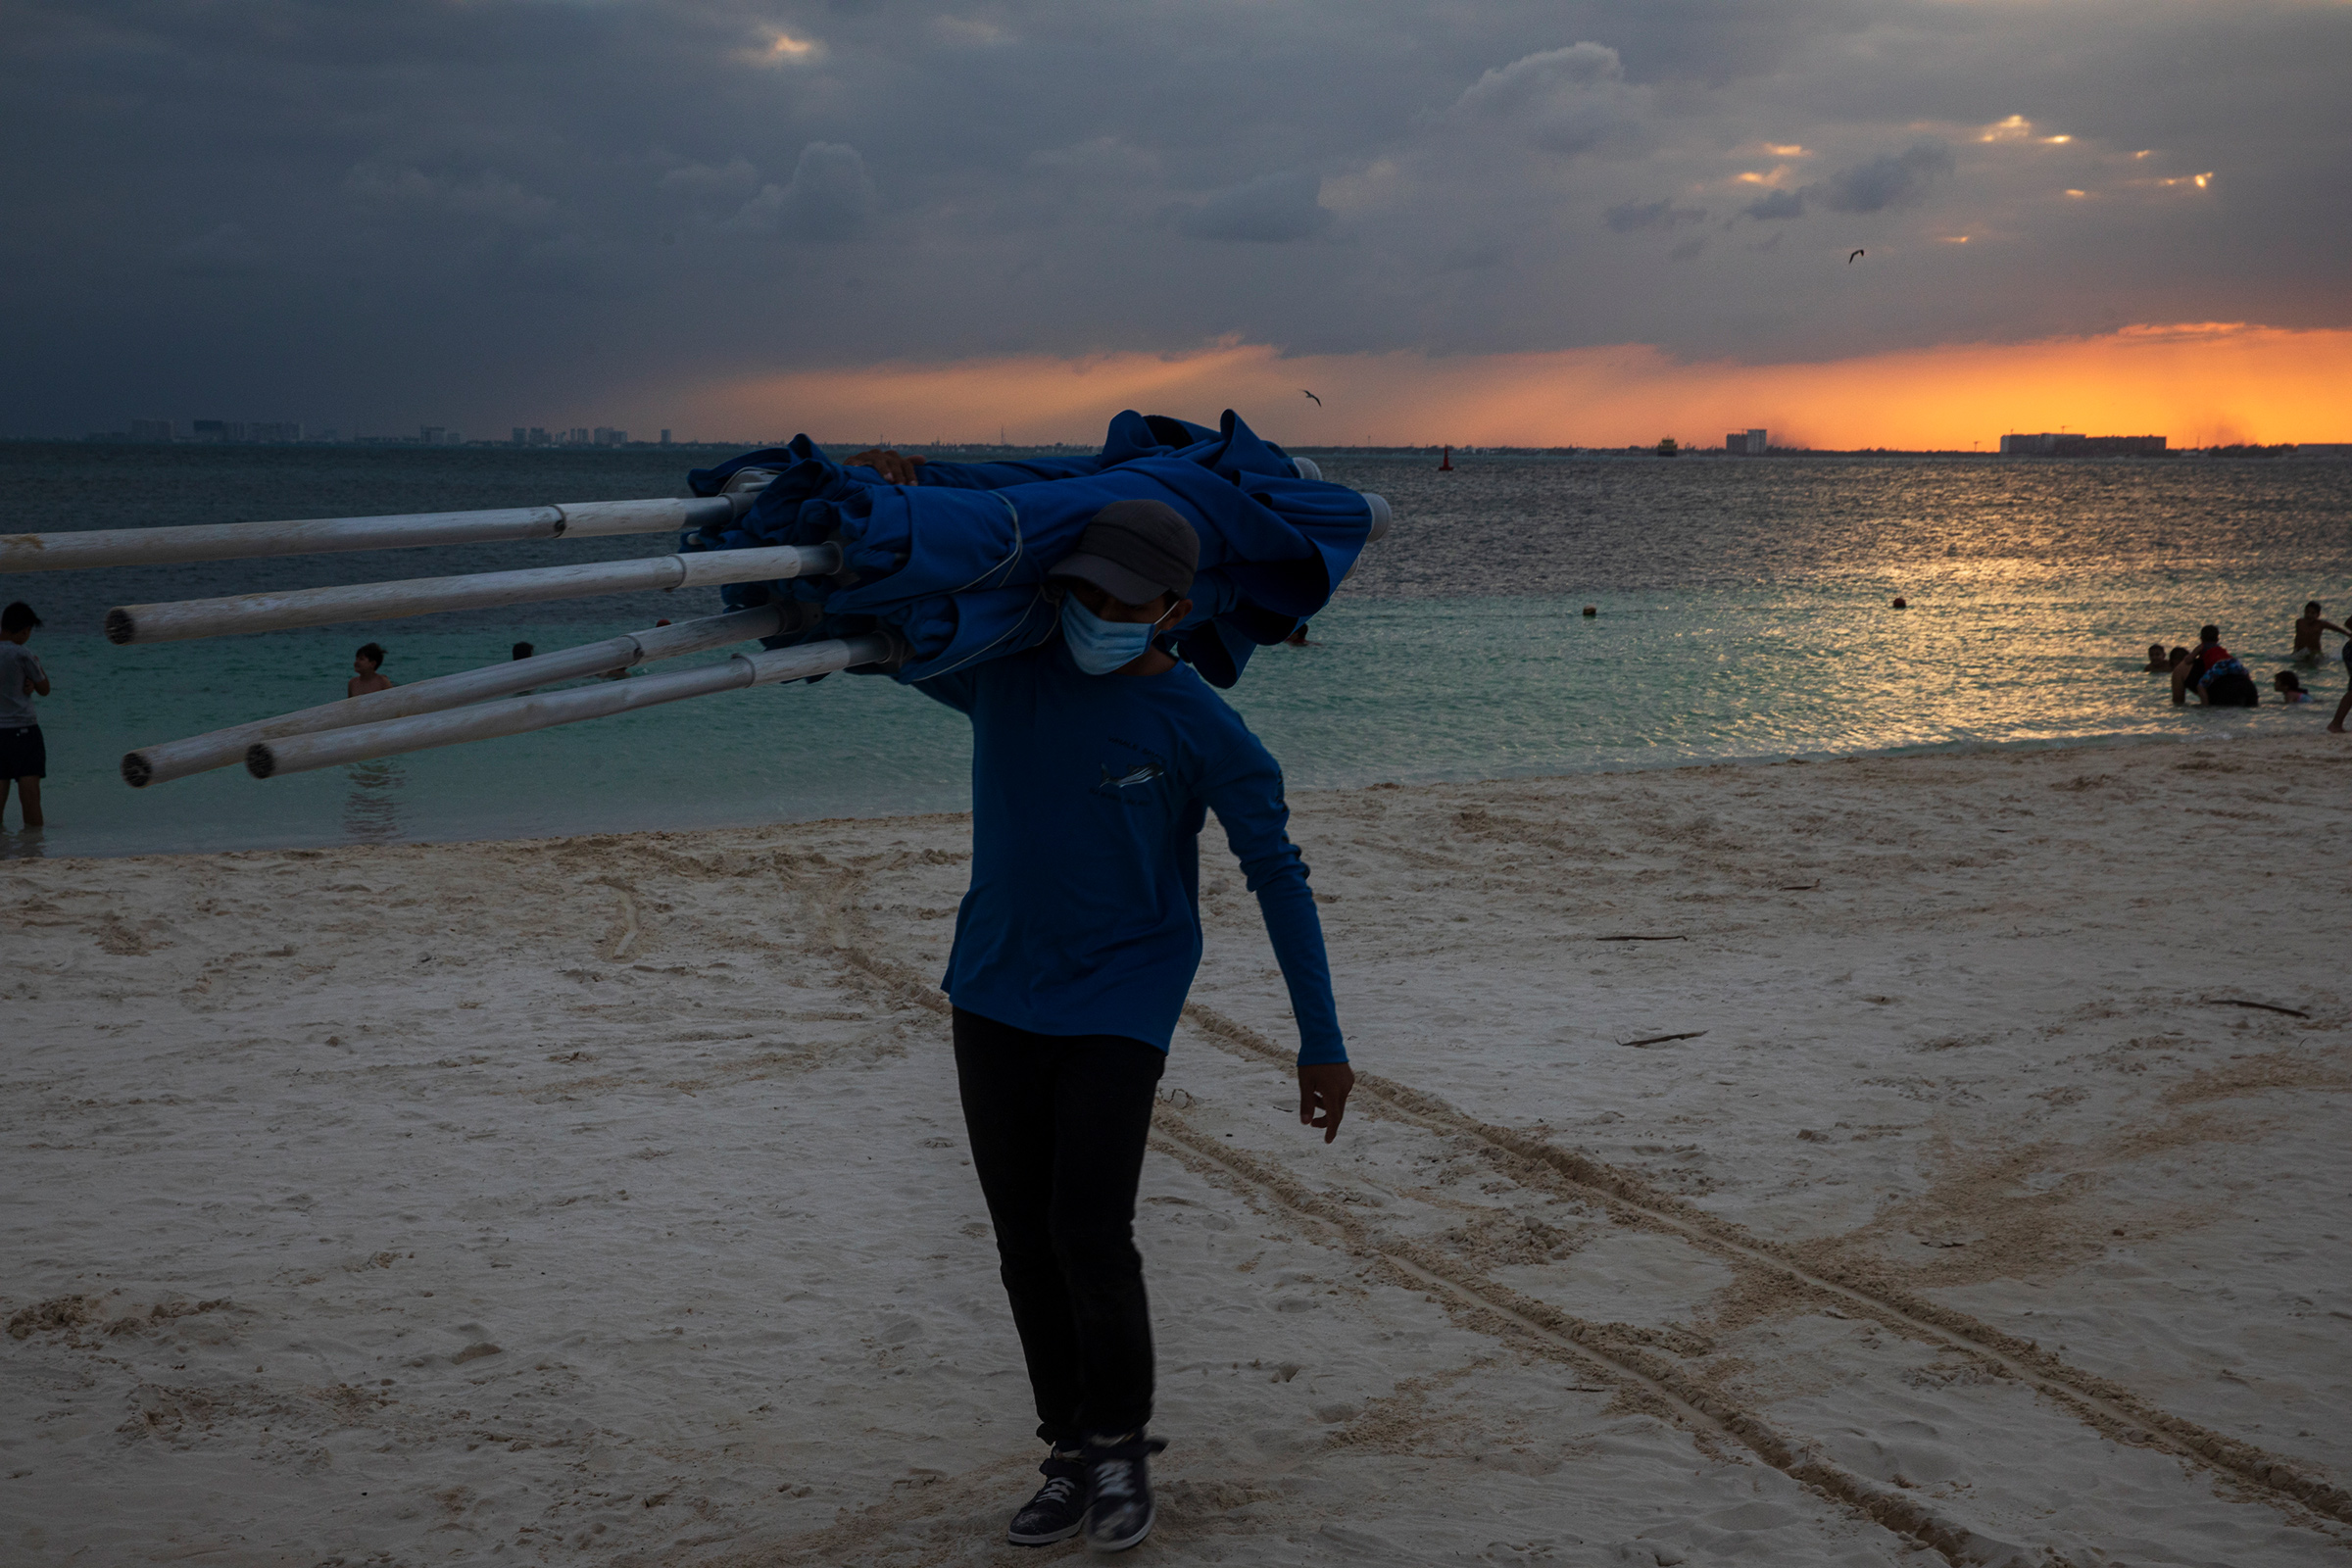 A worker collects beach umbrellas at the end of the day at Isla Mujeres, Quintana Roo, on Dec. 2.